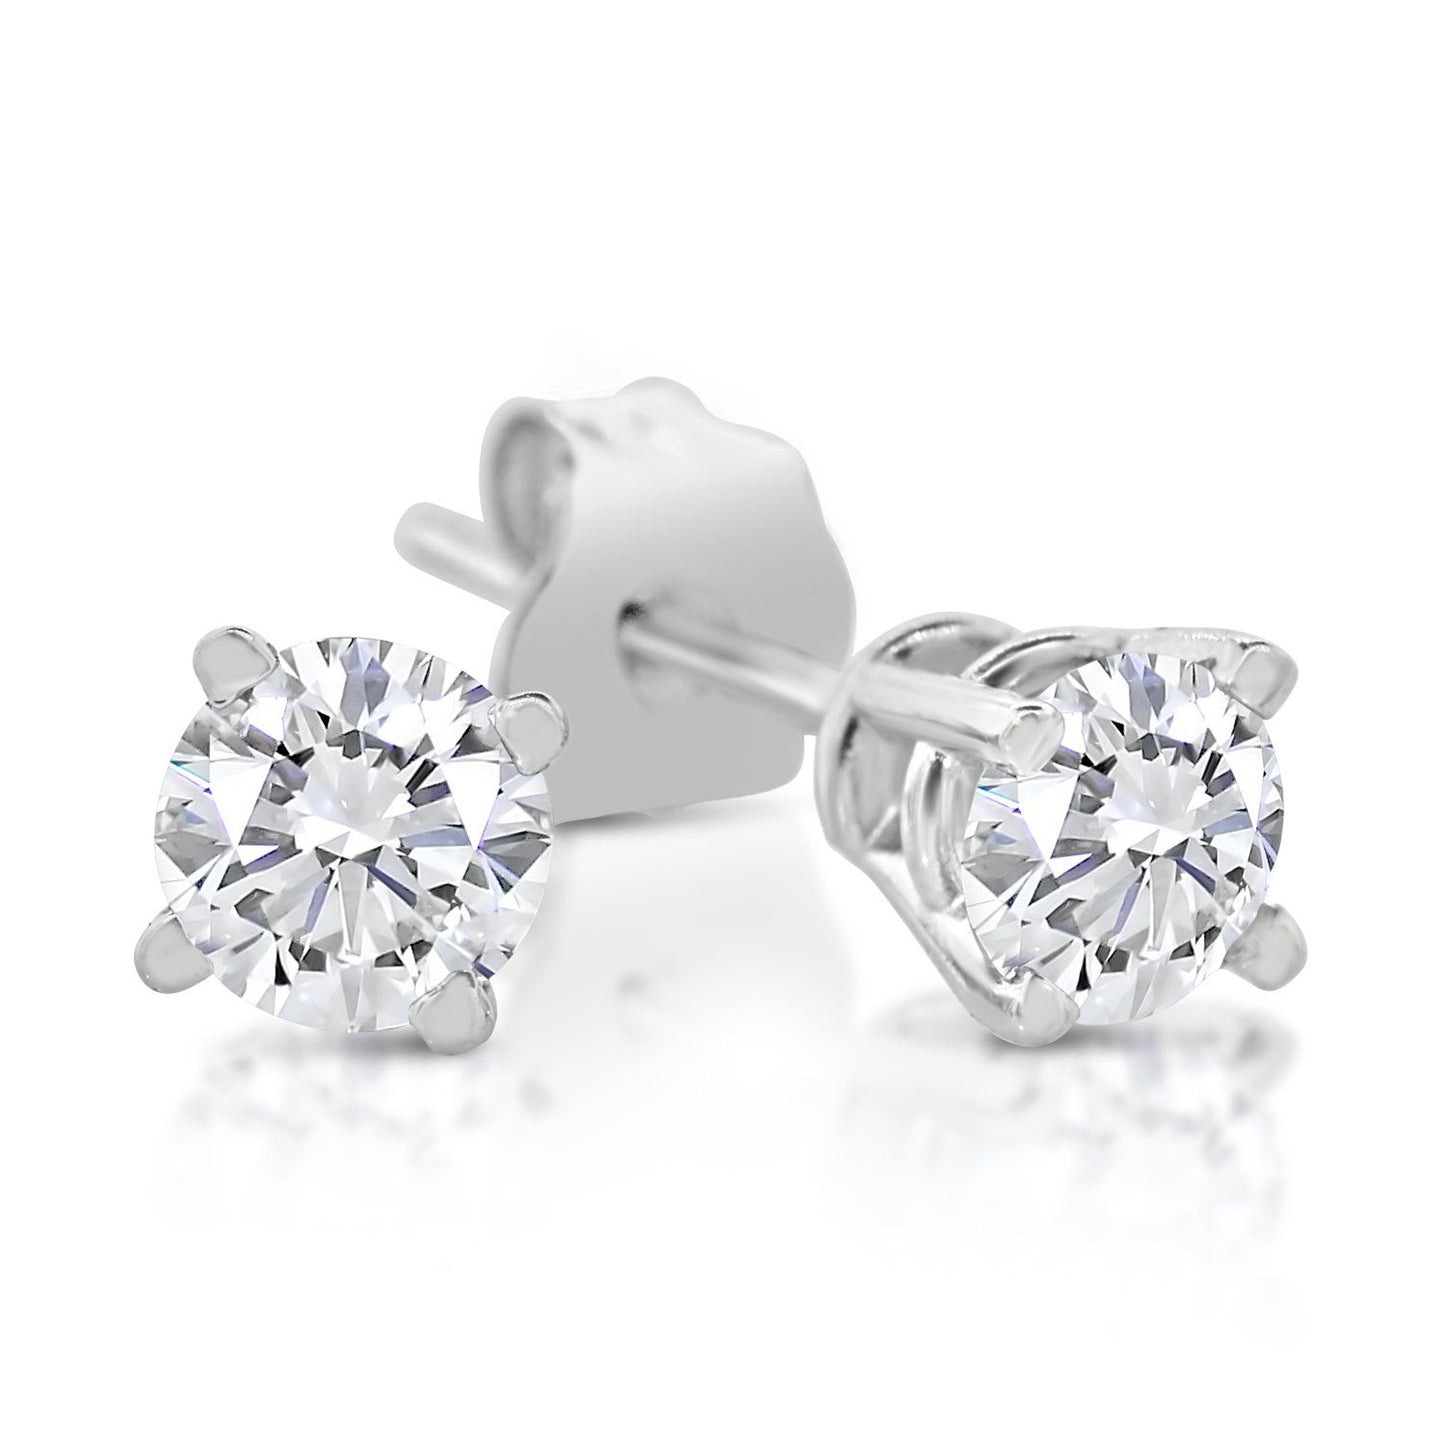 1/4 Carat TW Round Diamond Solitaire Stud Earrings in 14K White Gold